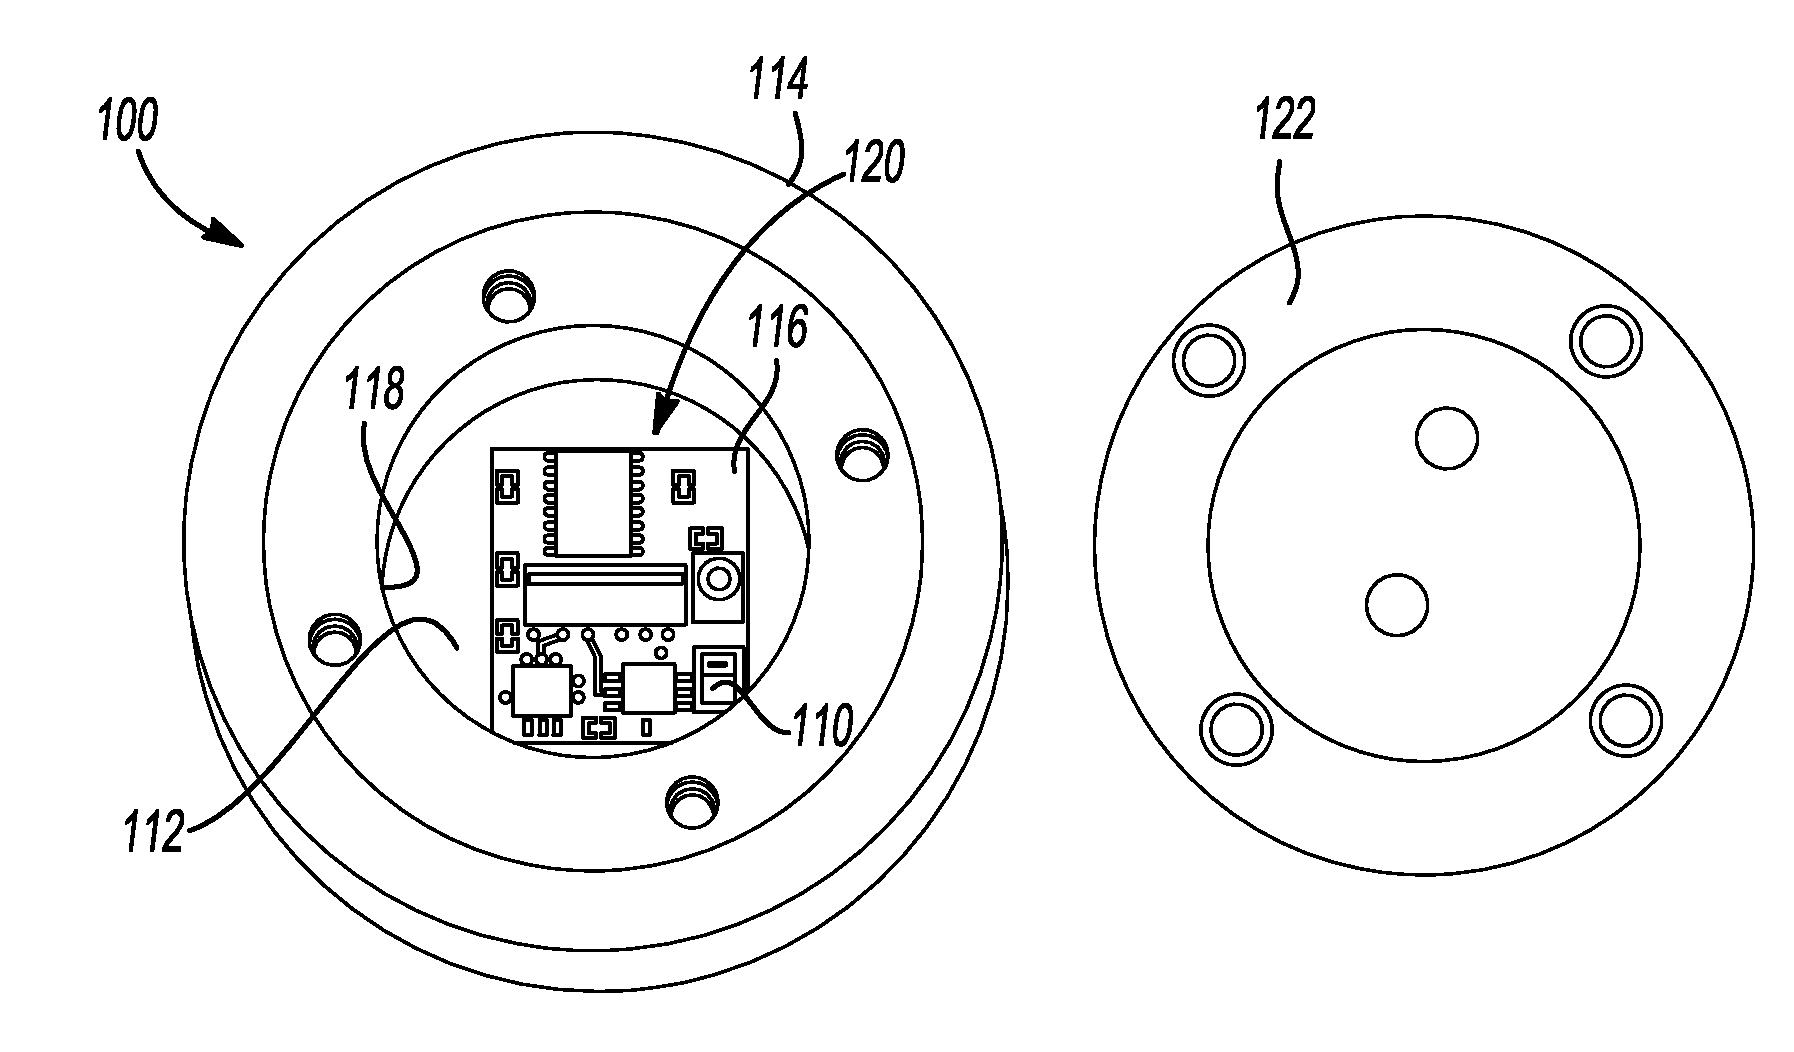 Apparatus and method for employing miniature inertial measurement units for deducing forces and moments on bodies